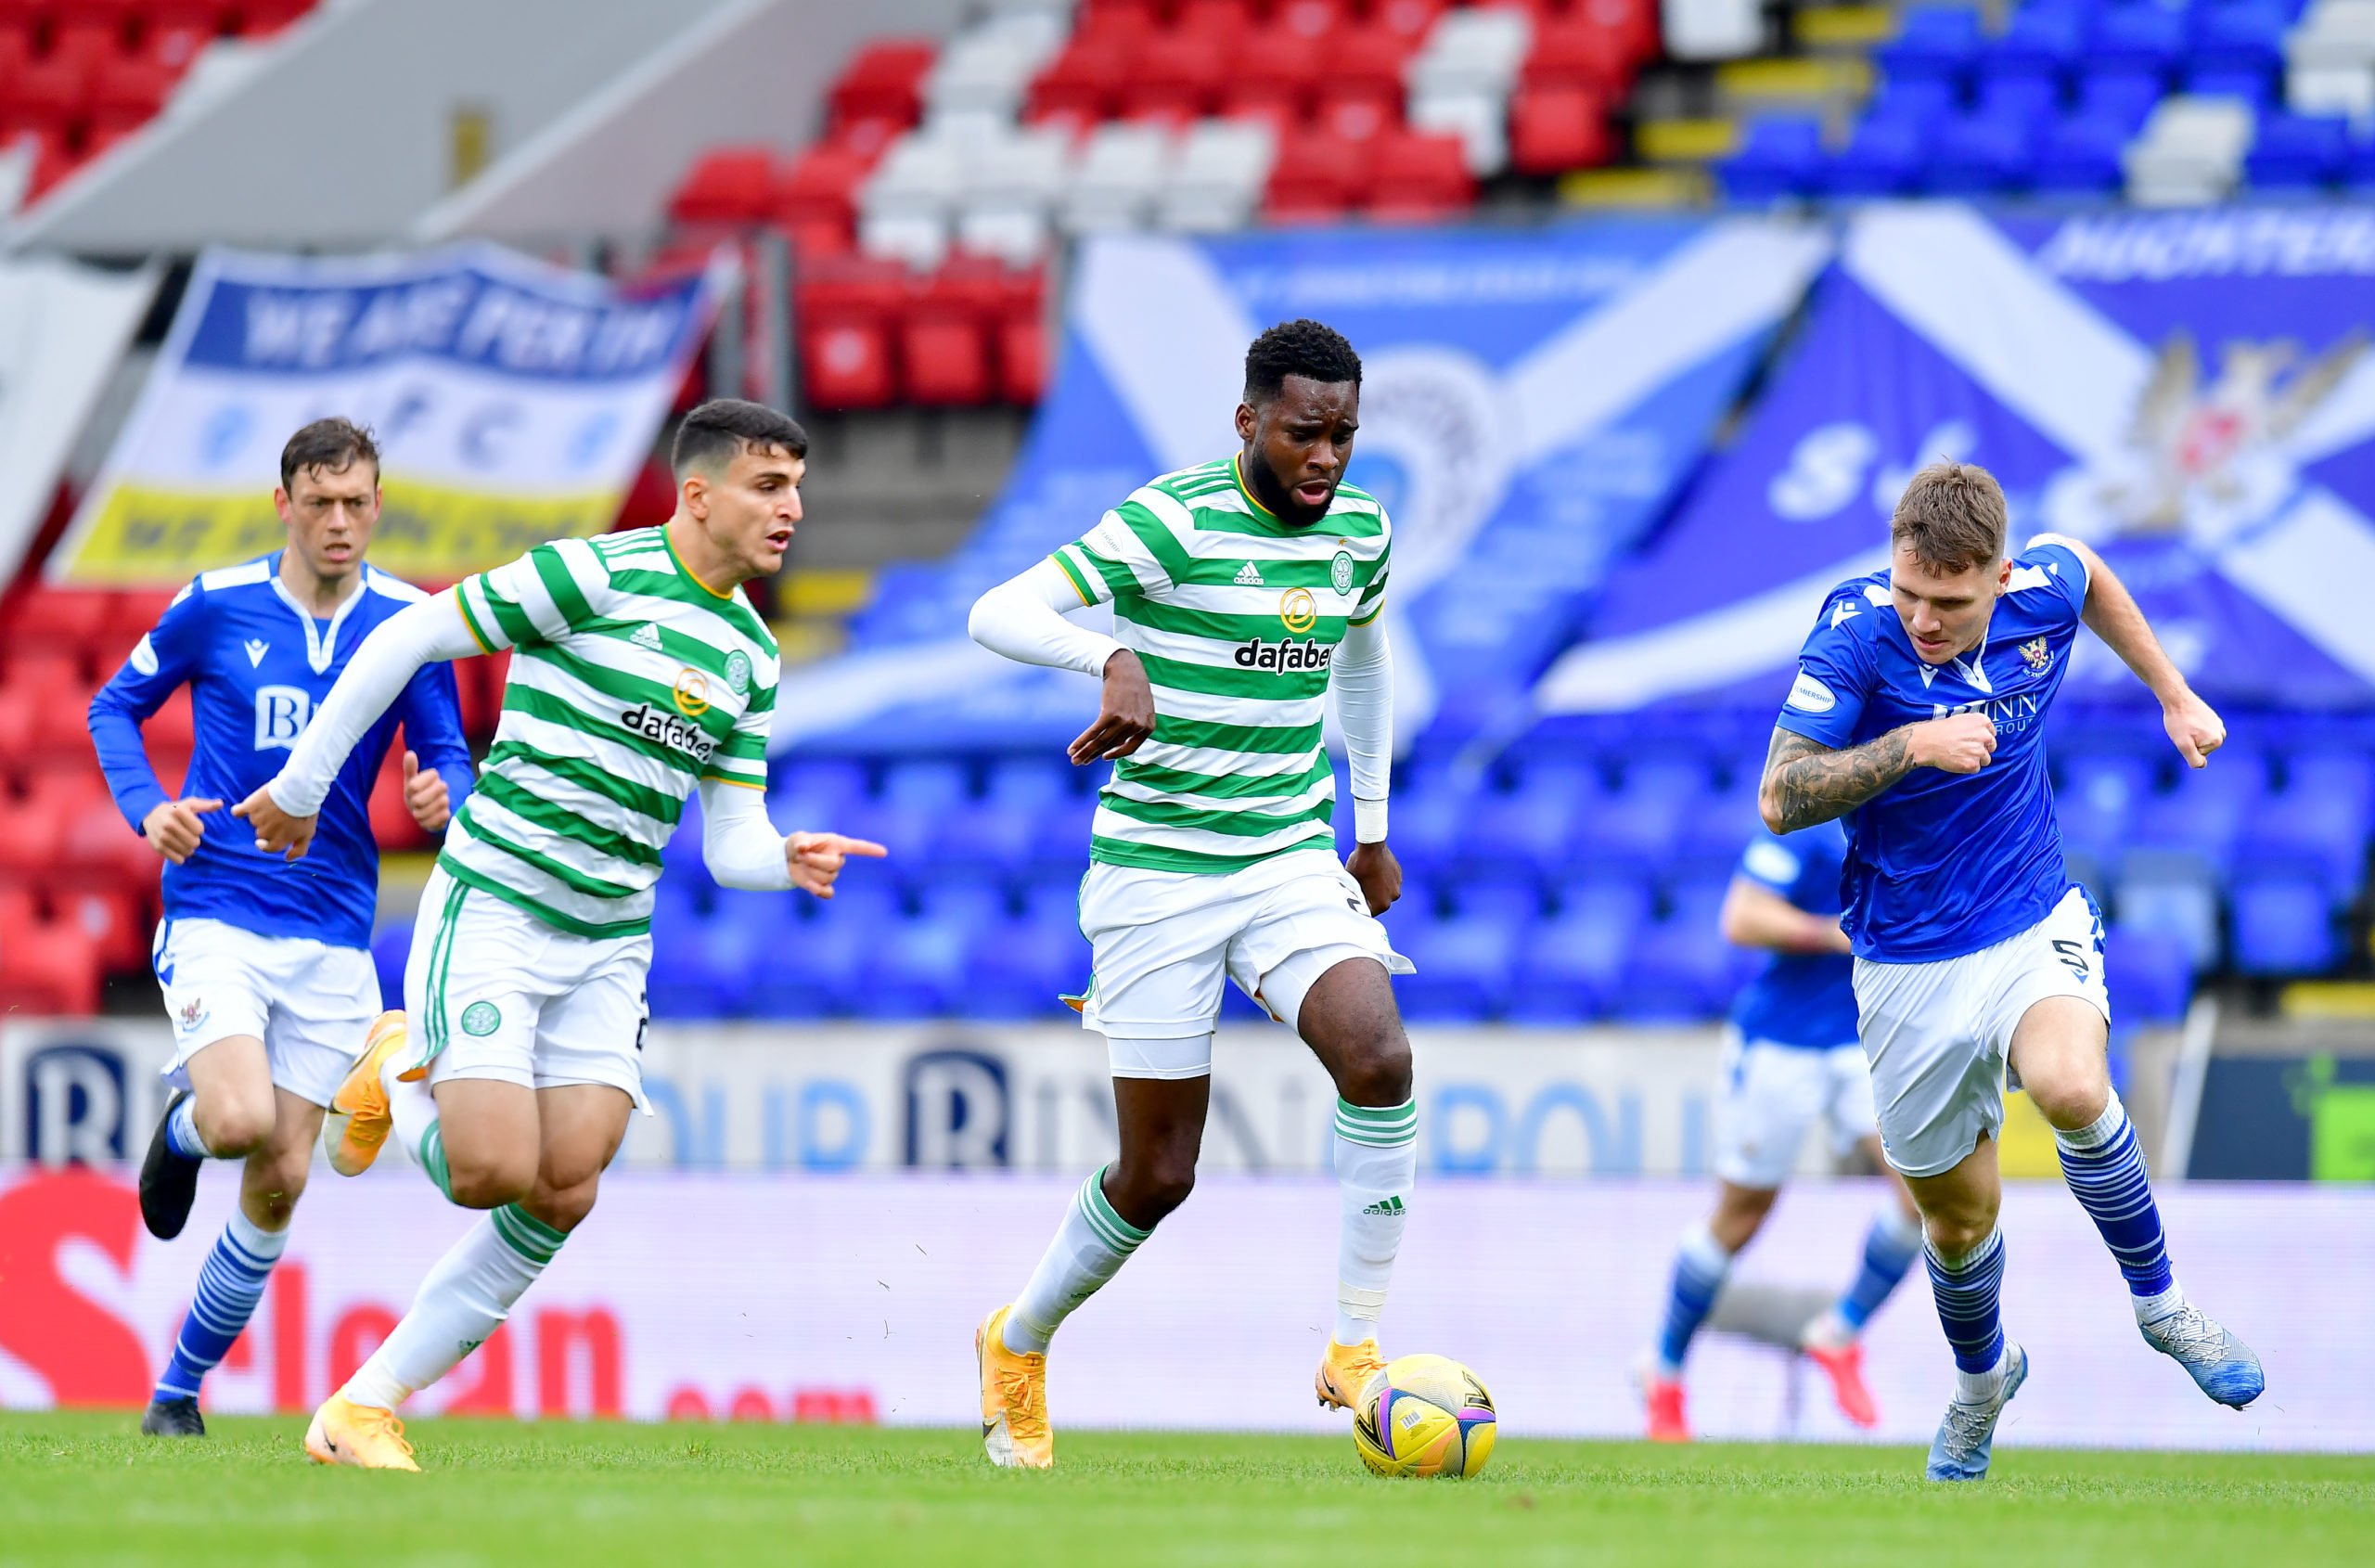 Locked out of Paradise: with TV options limited, Celtic and St. Johnstone fans miss out